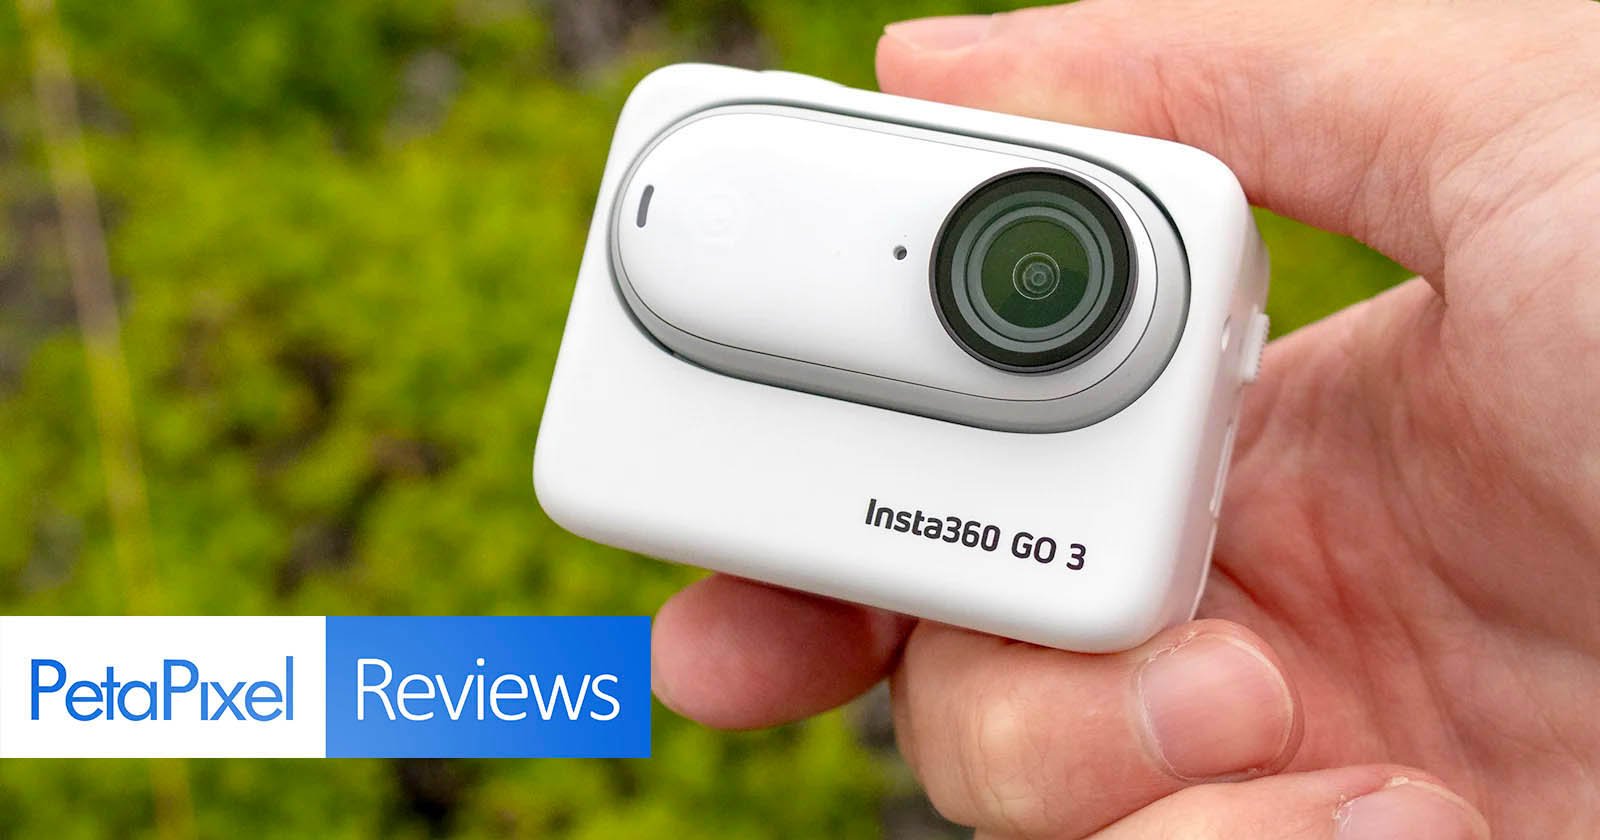 Insta360 Go 3 Review: Not the Best Looking, Maybe the Most Fun